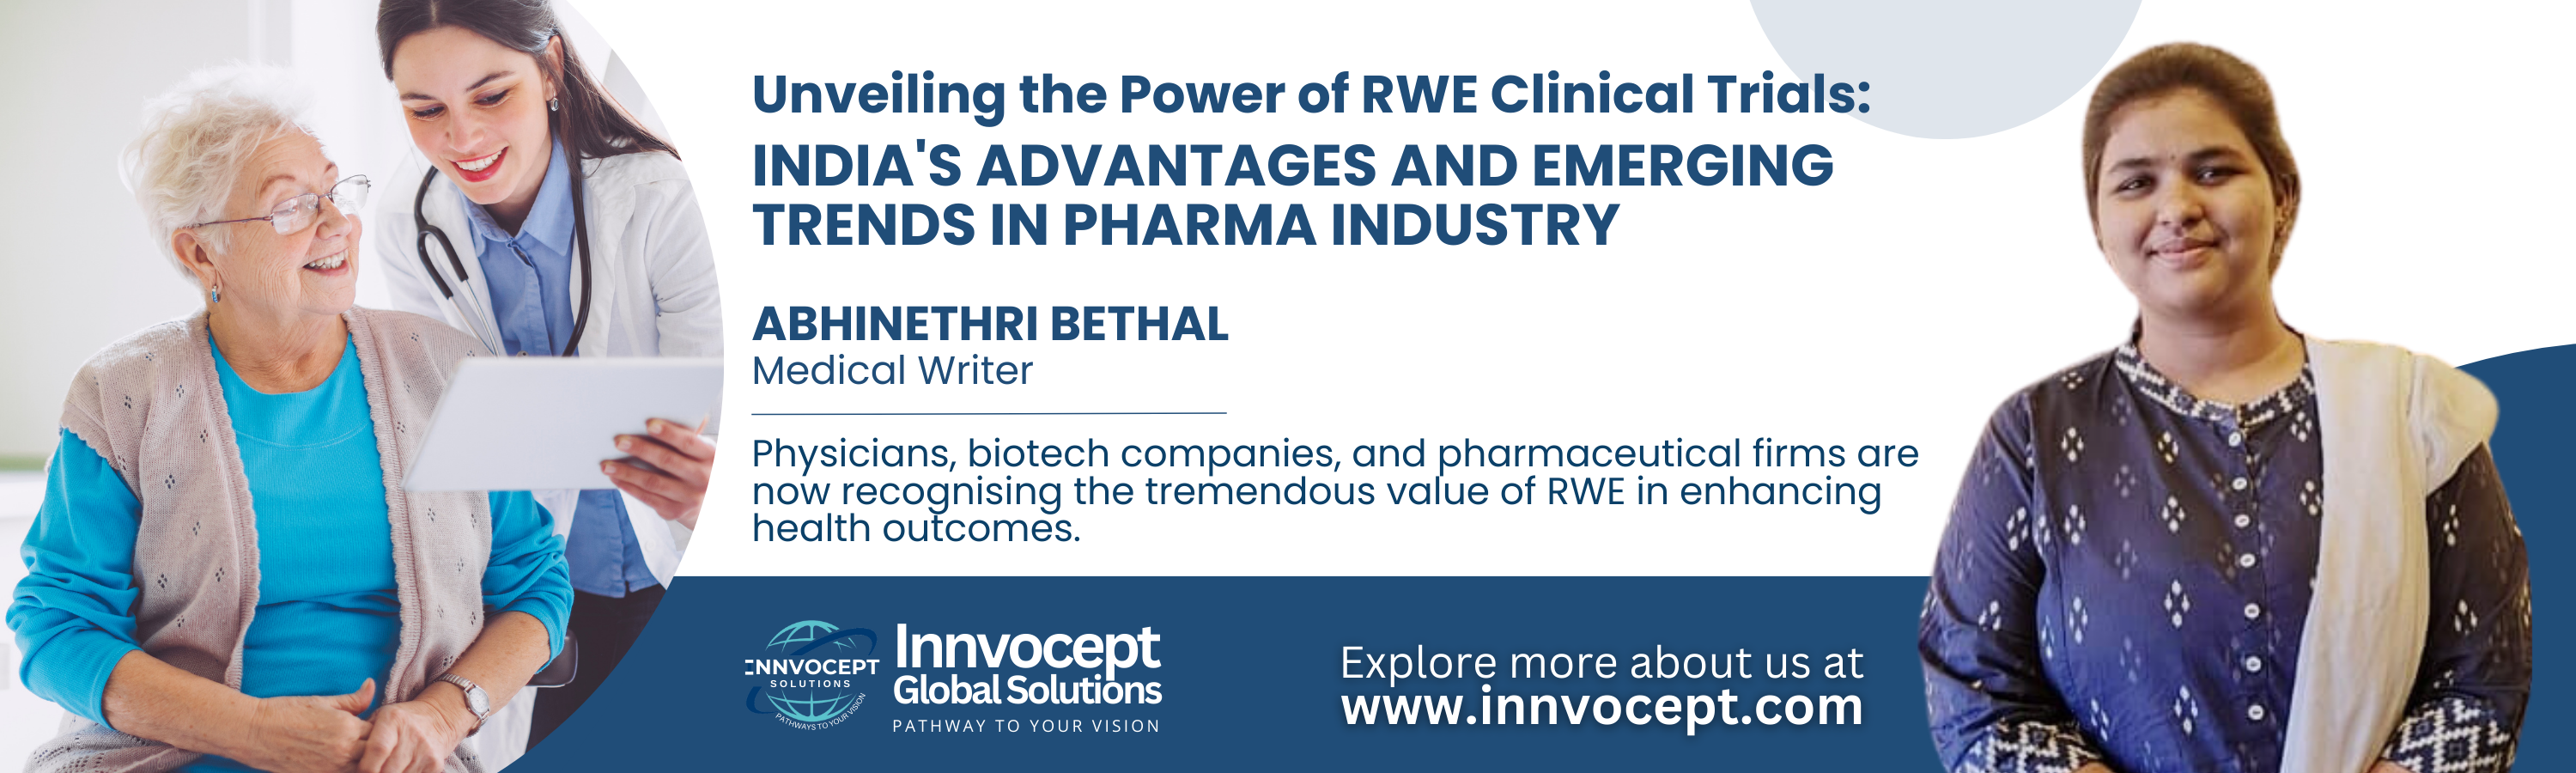 Unveiling the Power of RWE Clinical Trials: India's Advantages and Emerging Trends in Pharma Industry